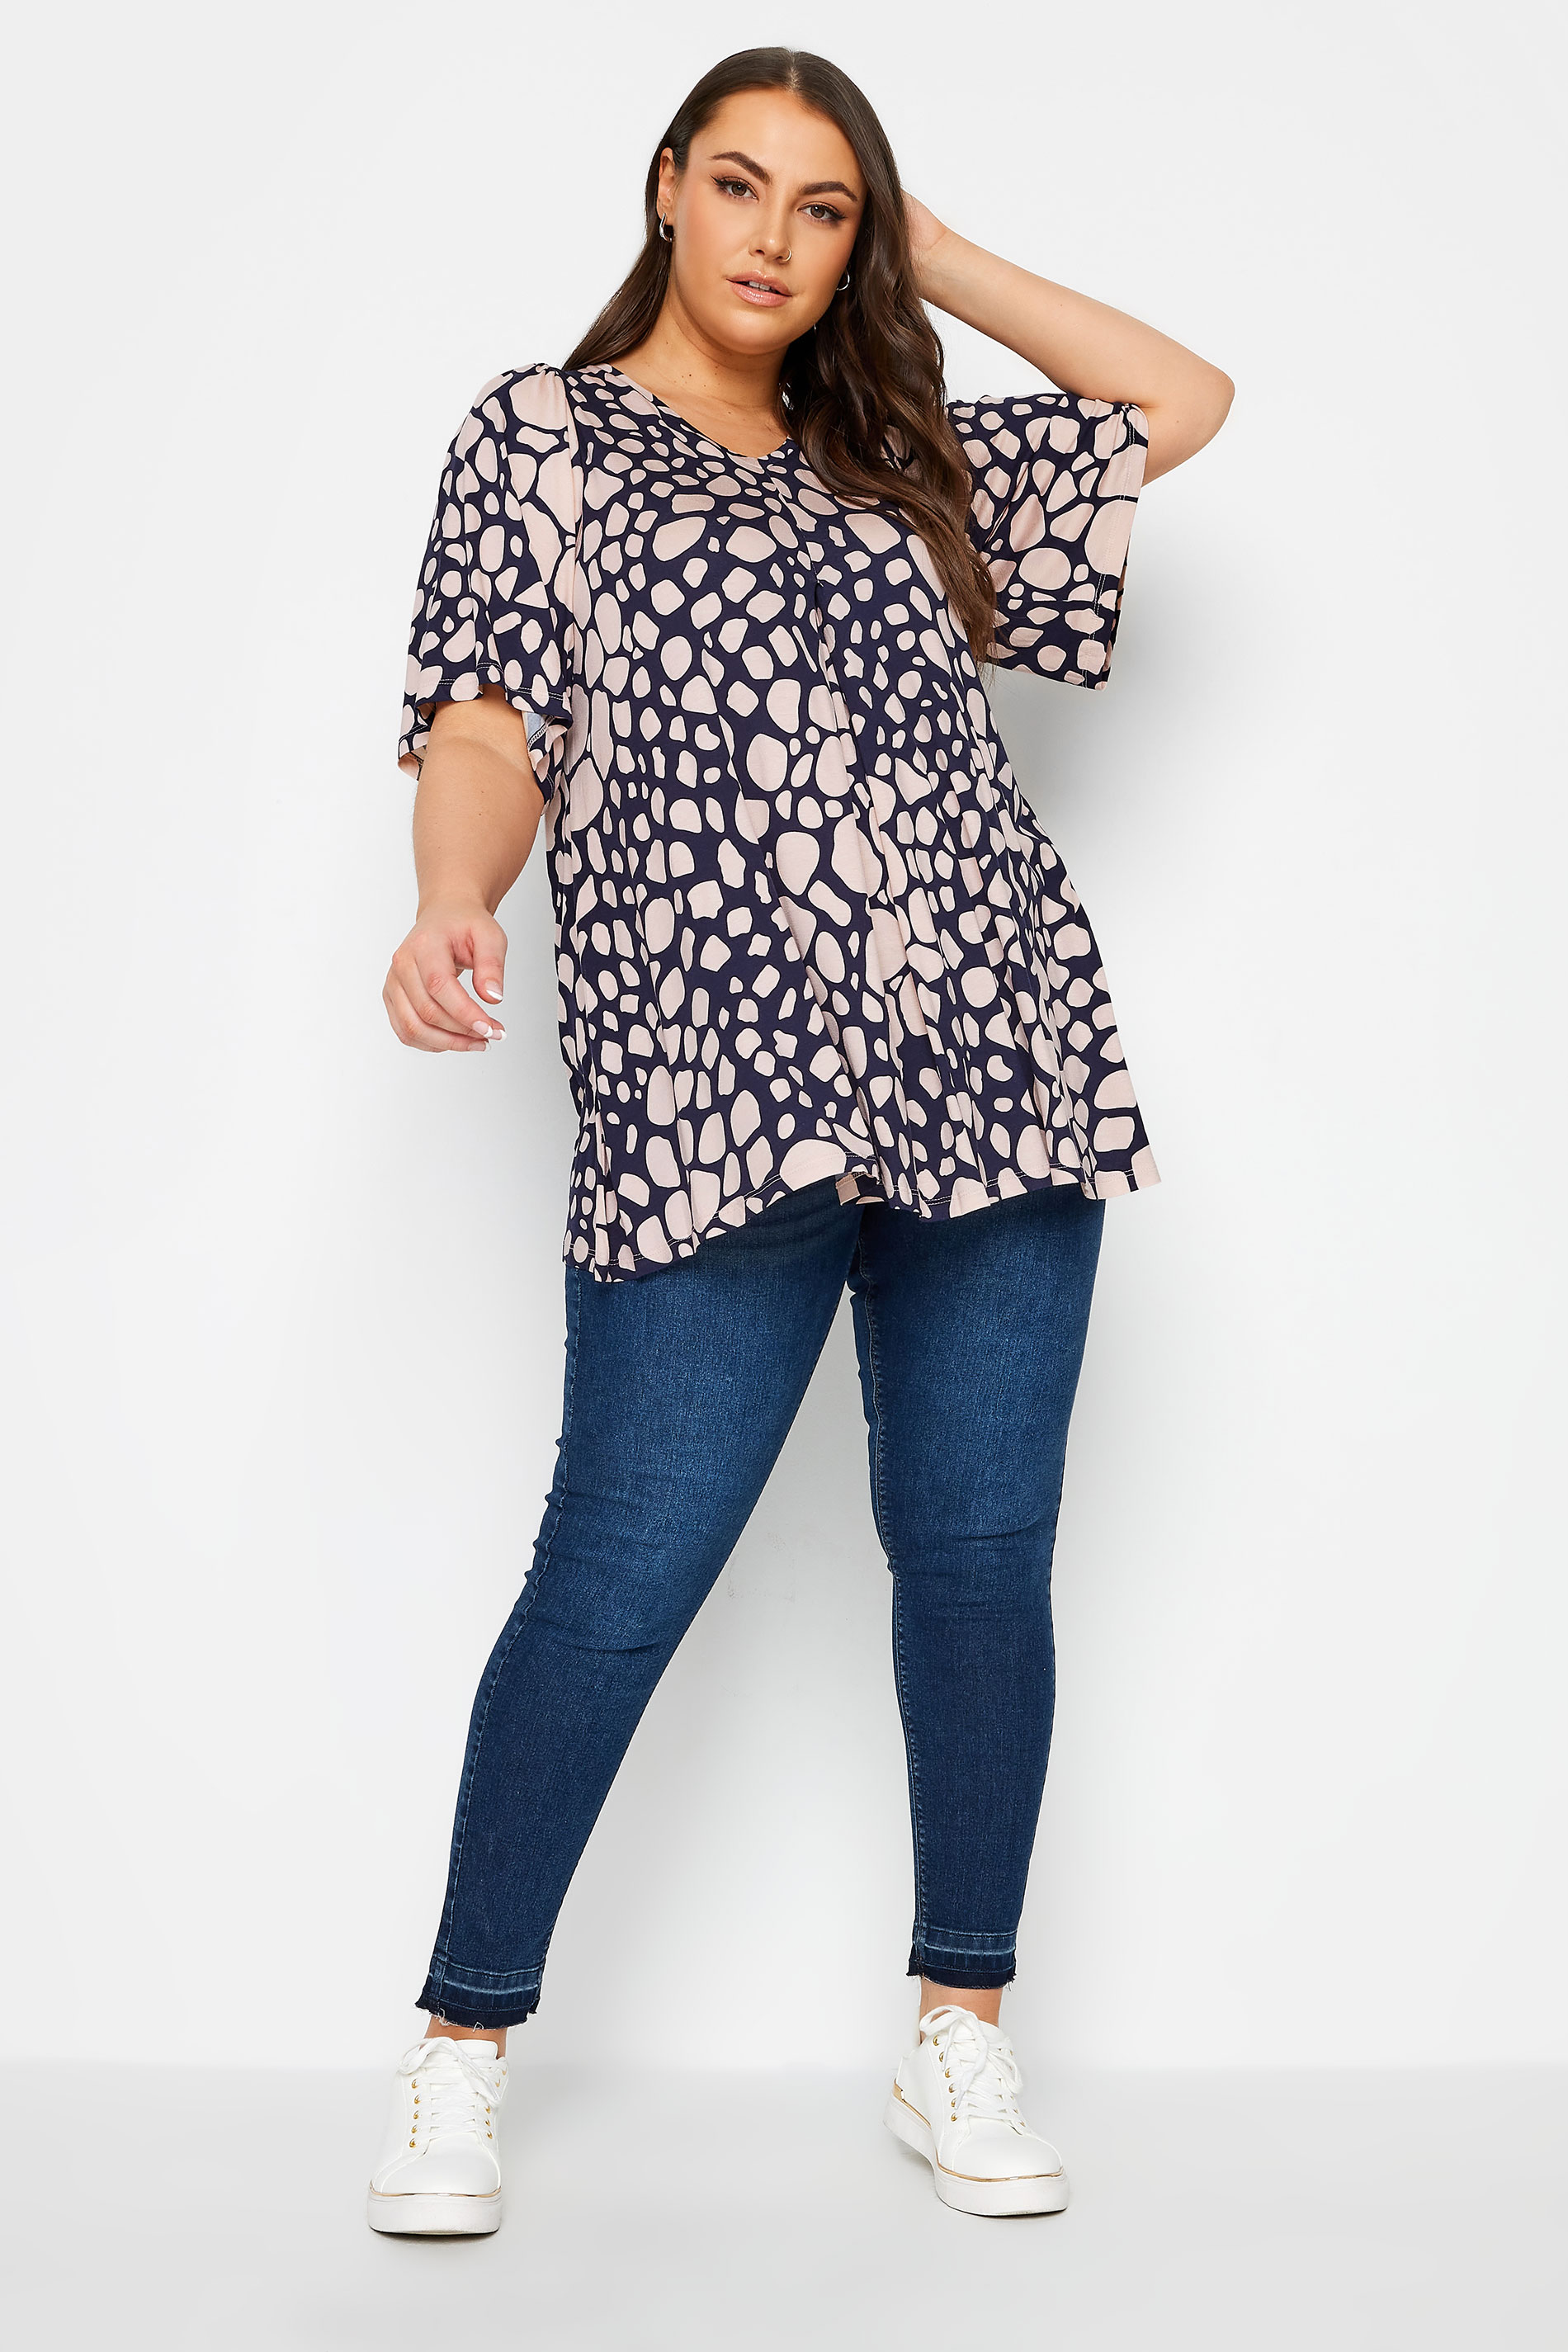 YOURS Plus Size Navy Blue & Pink Spot Print Swing Top | Yours Clothing